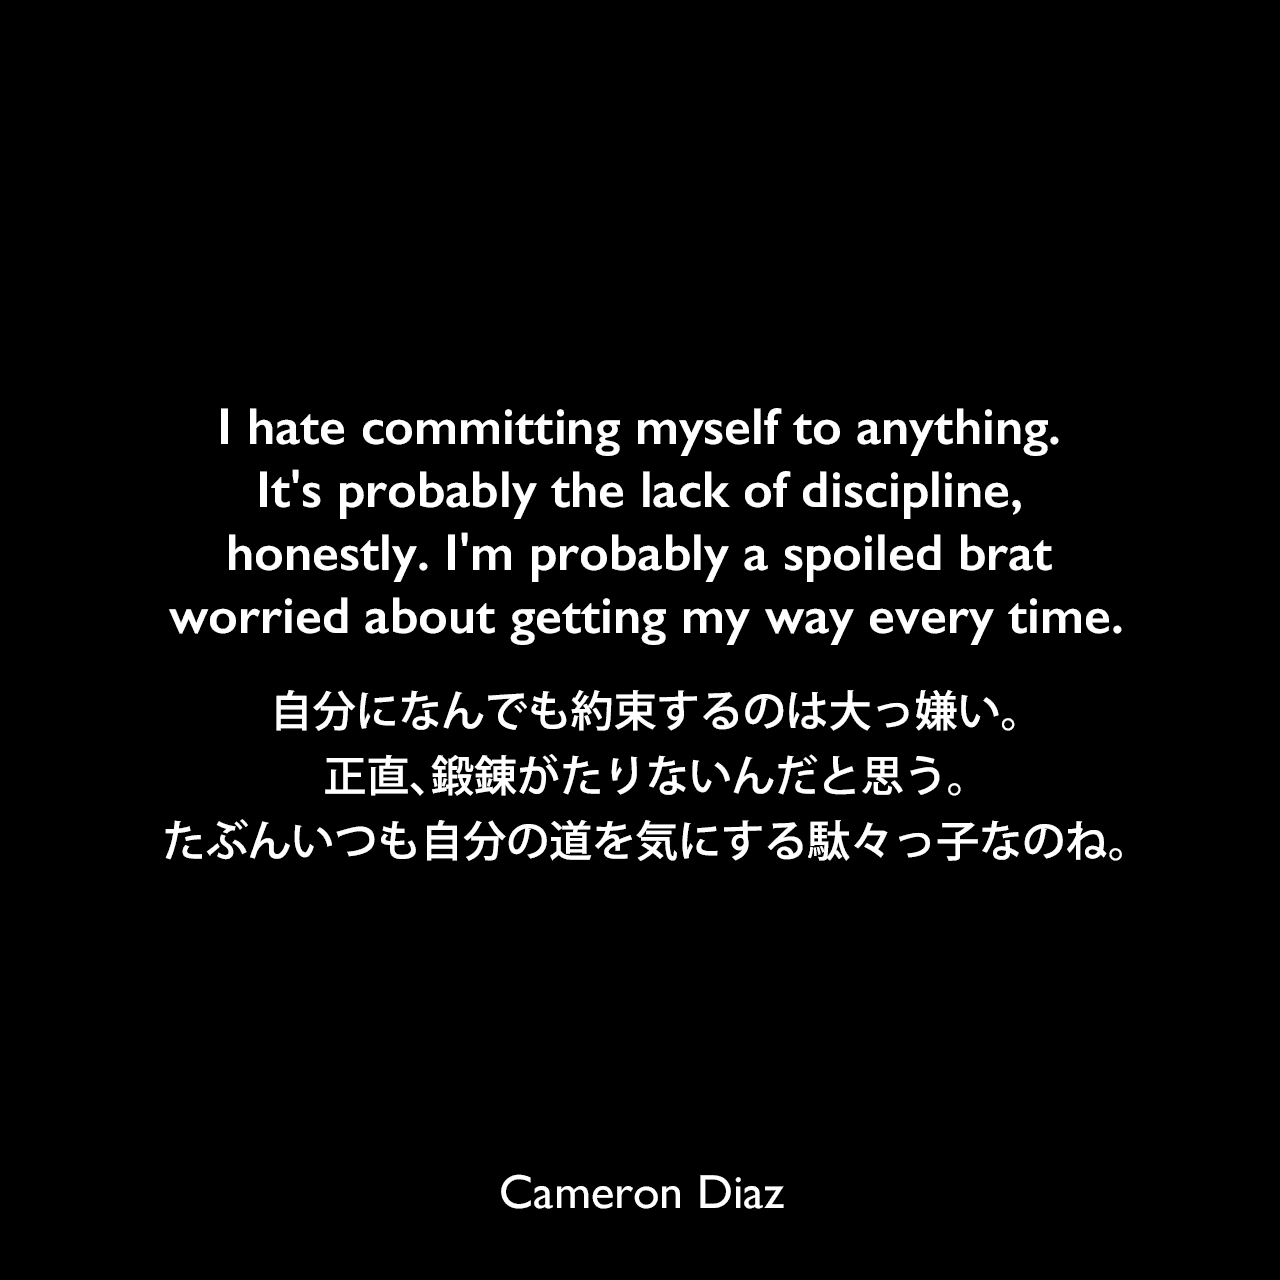 I hate committing myself to anything. It's probably the lack of discipline, honestly. I'm probably a spoiled brat worried about getting my way every time.自分になんでも約束するのは大っ嫌い。正直、鍛錬がたりないんだと思う。たぶんいつも自分の道を気にする駄々っ子なのね。Cameron Diaz